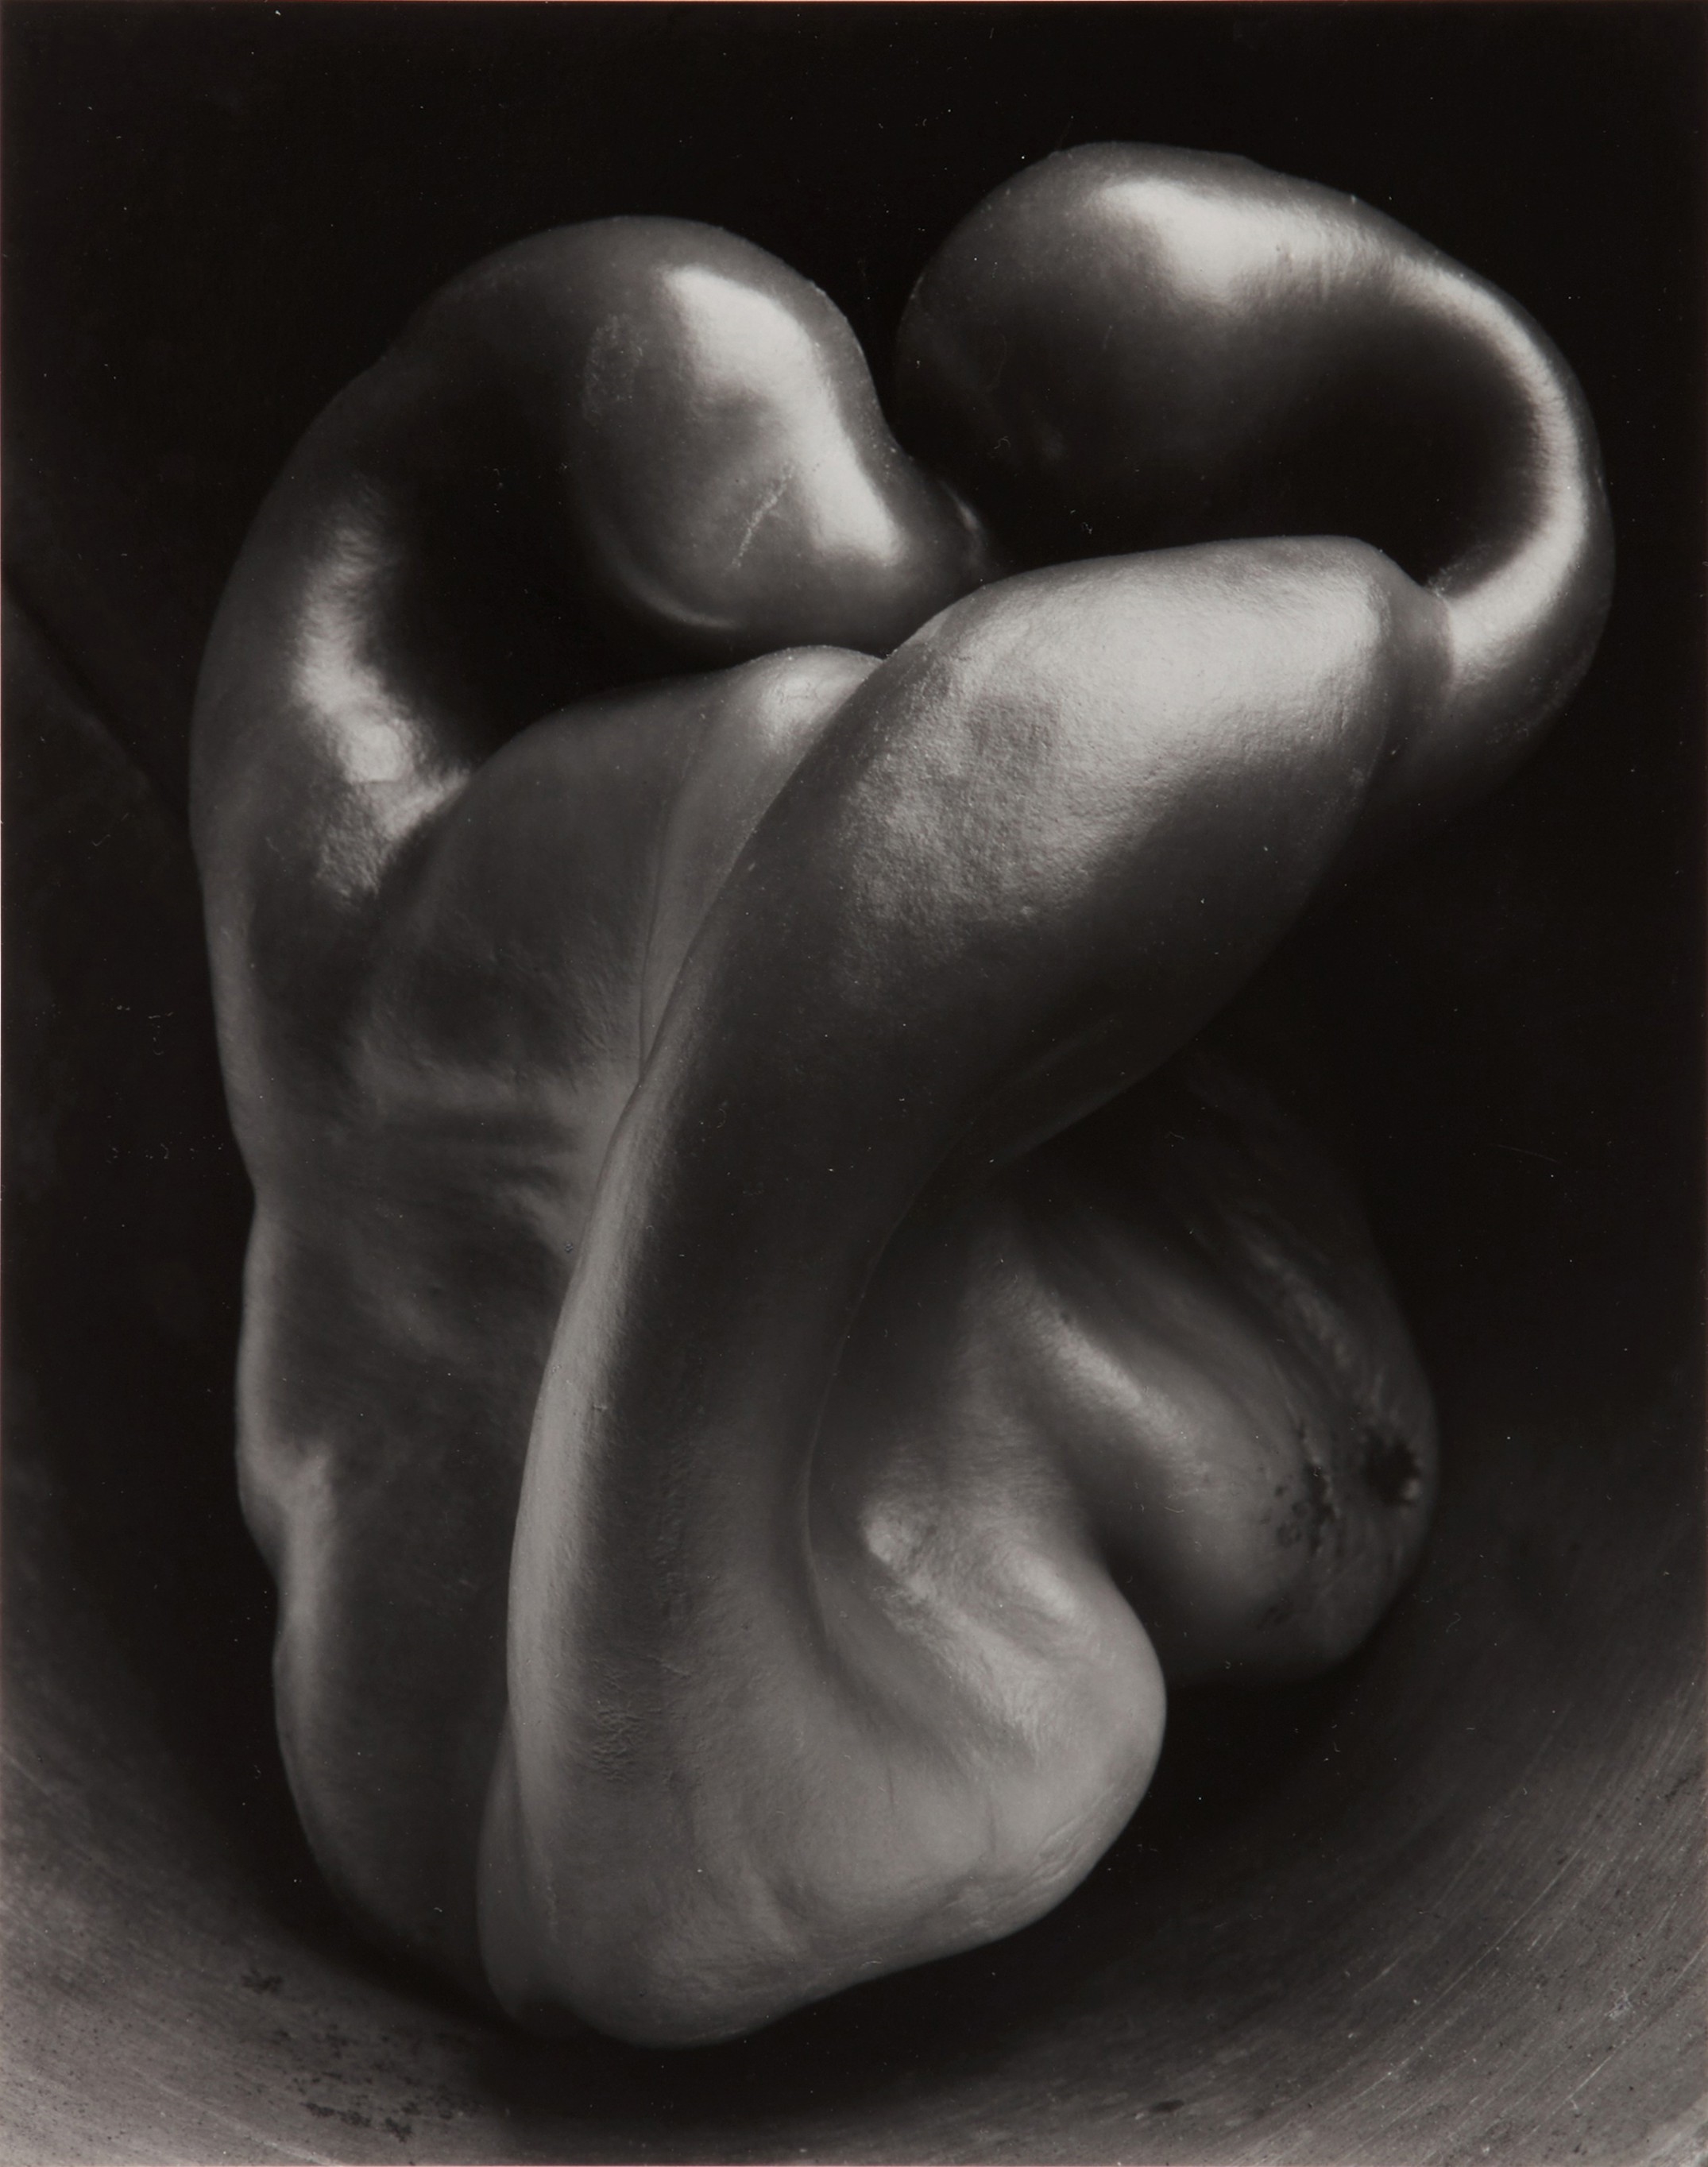 Pepper (No. 30) by Edward Weston, Executed in 1930